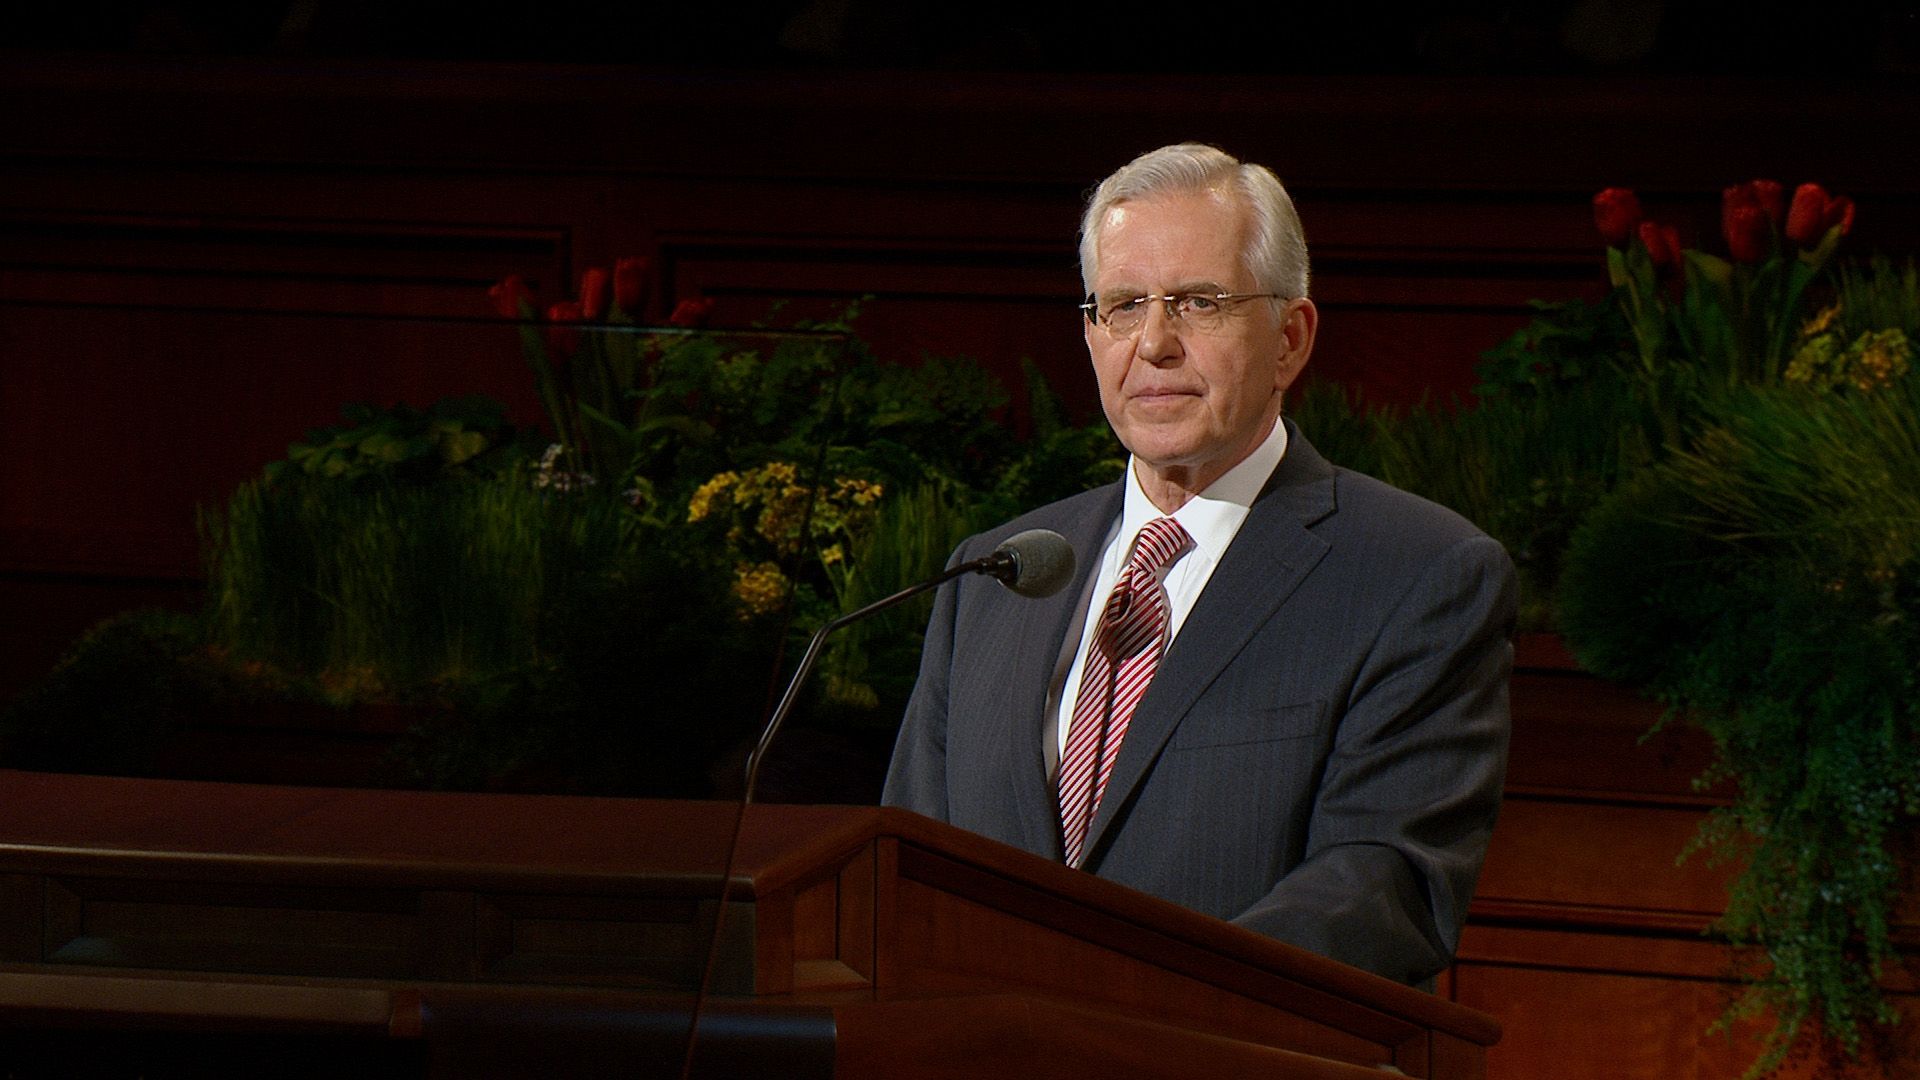 D. Todd Christofferson speaking from the pulpit during General Conference.  April 2015, Saturday afternoon session.